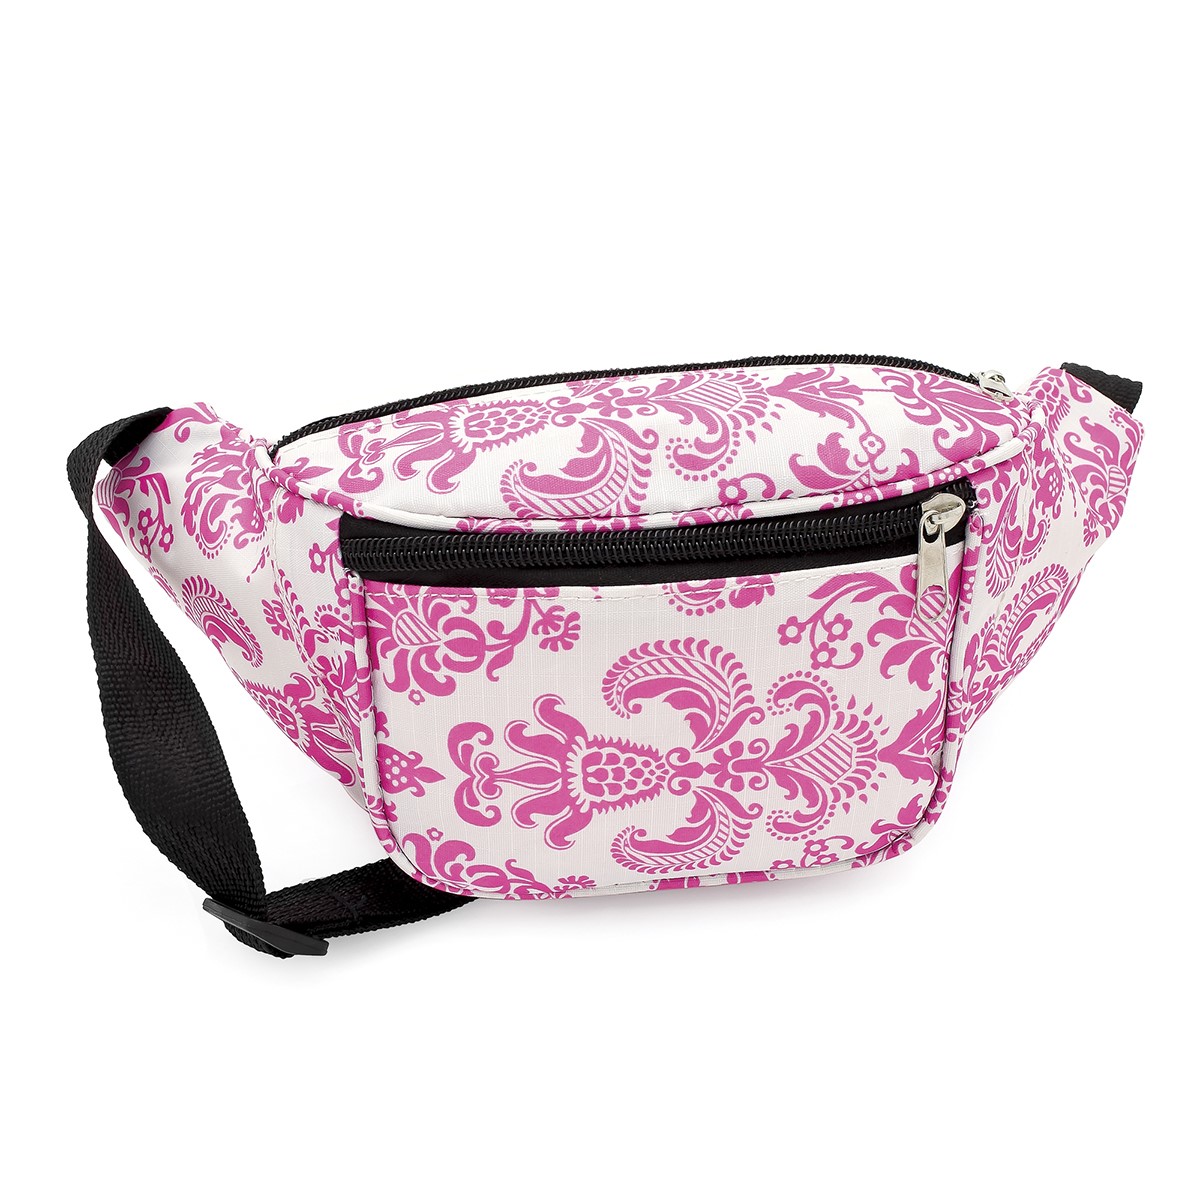 BUM BAG POUCH FANNY PACK TRAVEL HOLIDAY FESTIVAL POUCH BELT WALLET MONEY | eBay